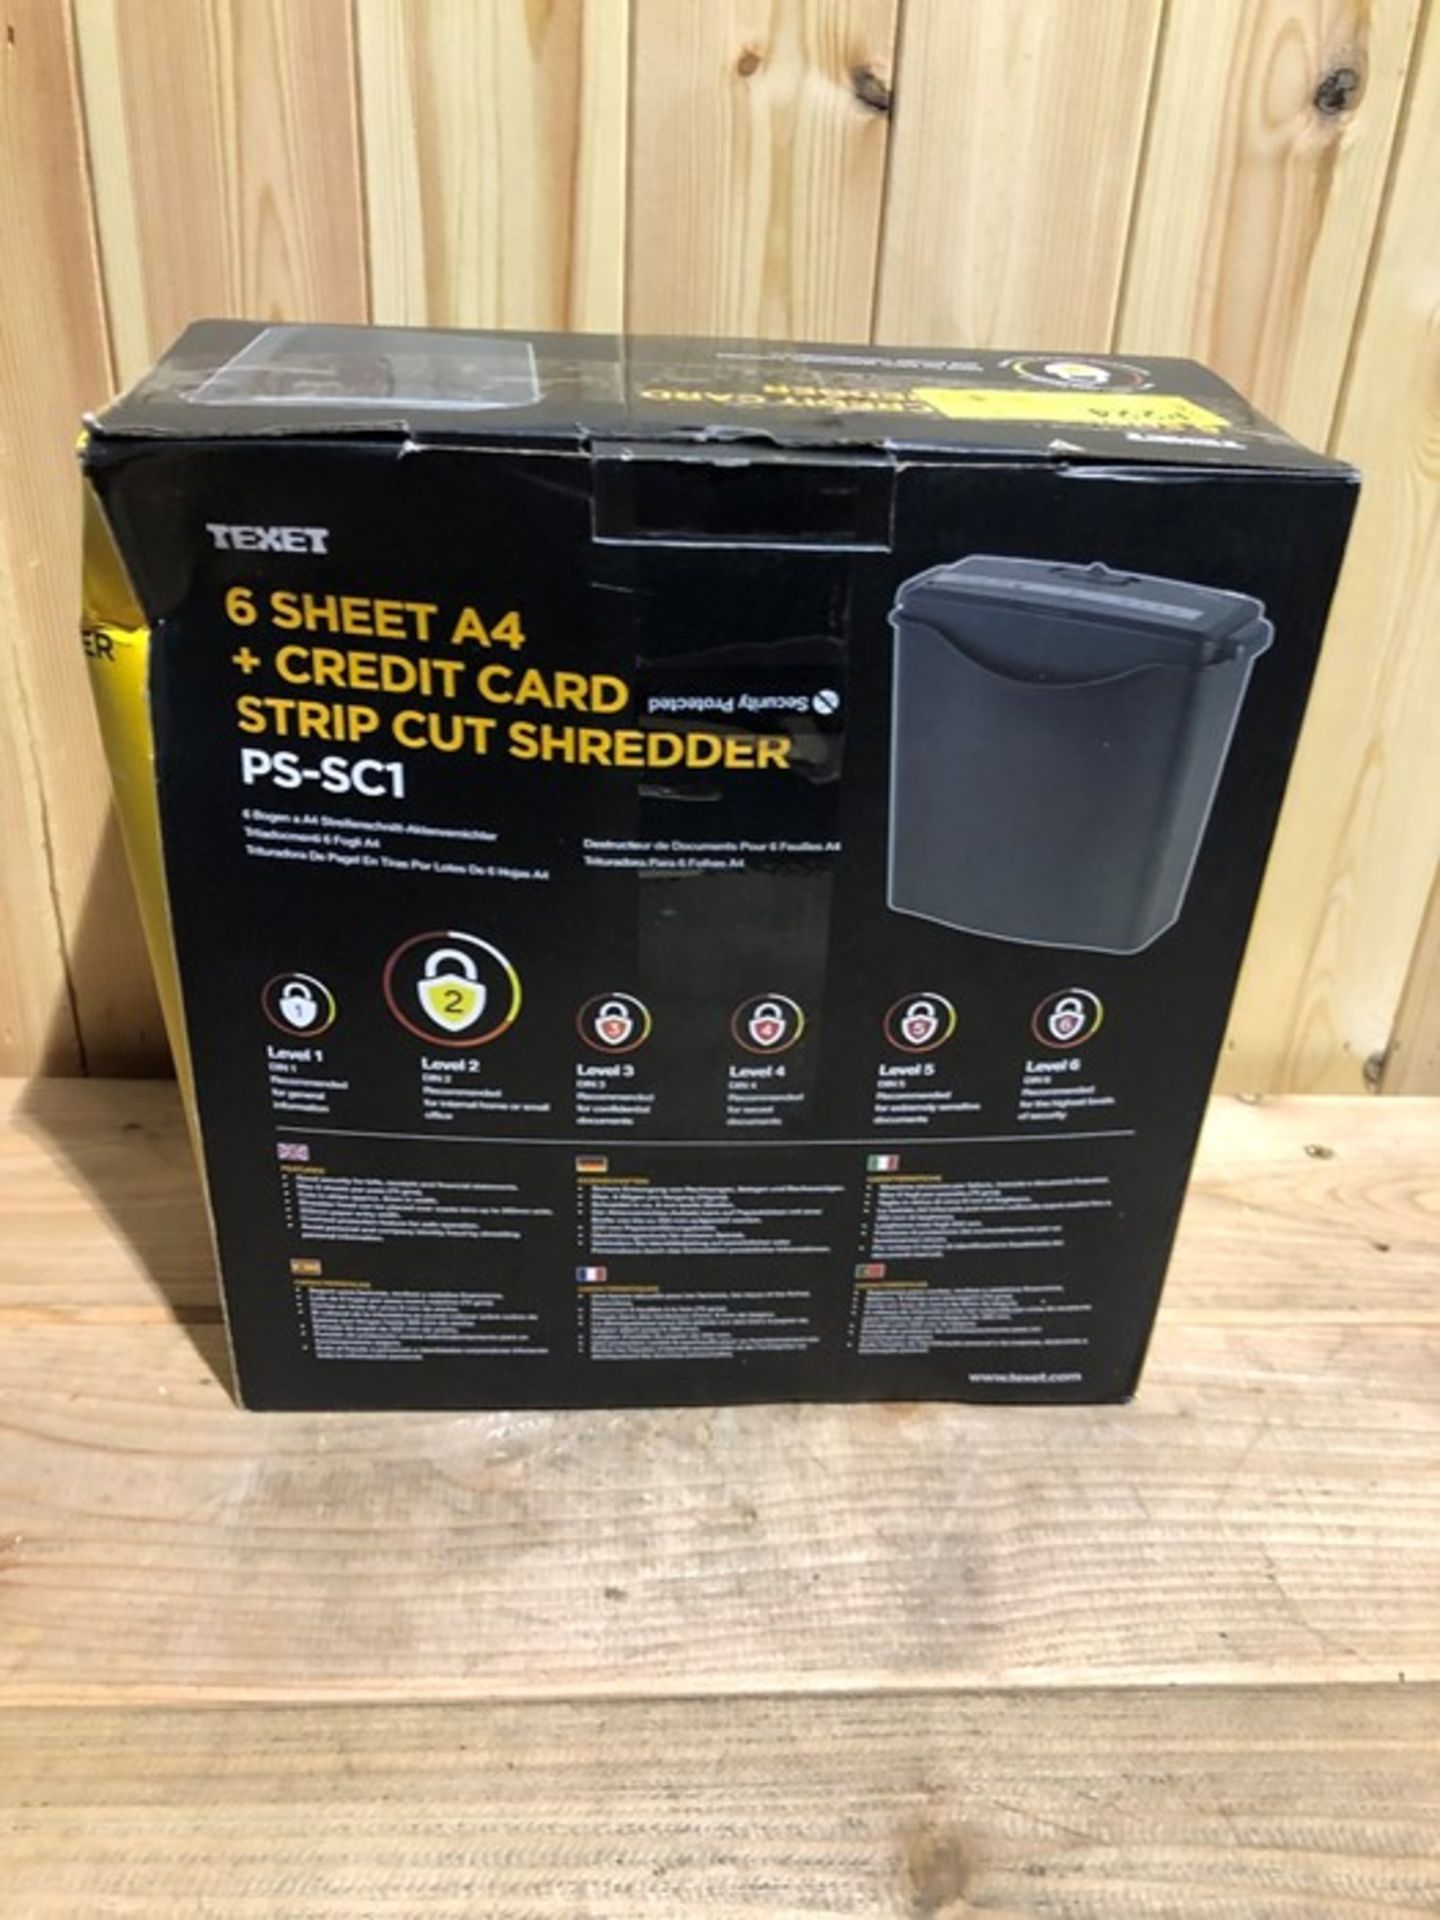 1 BOXED TEXET 6 SHEET A4 AND CREDIT CARD STRIP CUT SHREDDER PS-SC1 / RRP £15.00 / BL-9653 (PUBLIC